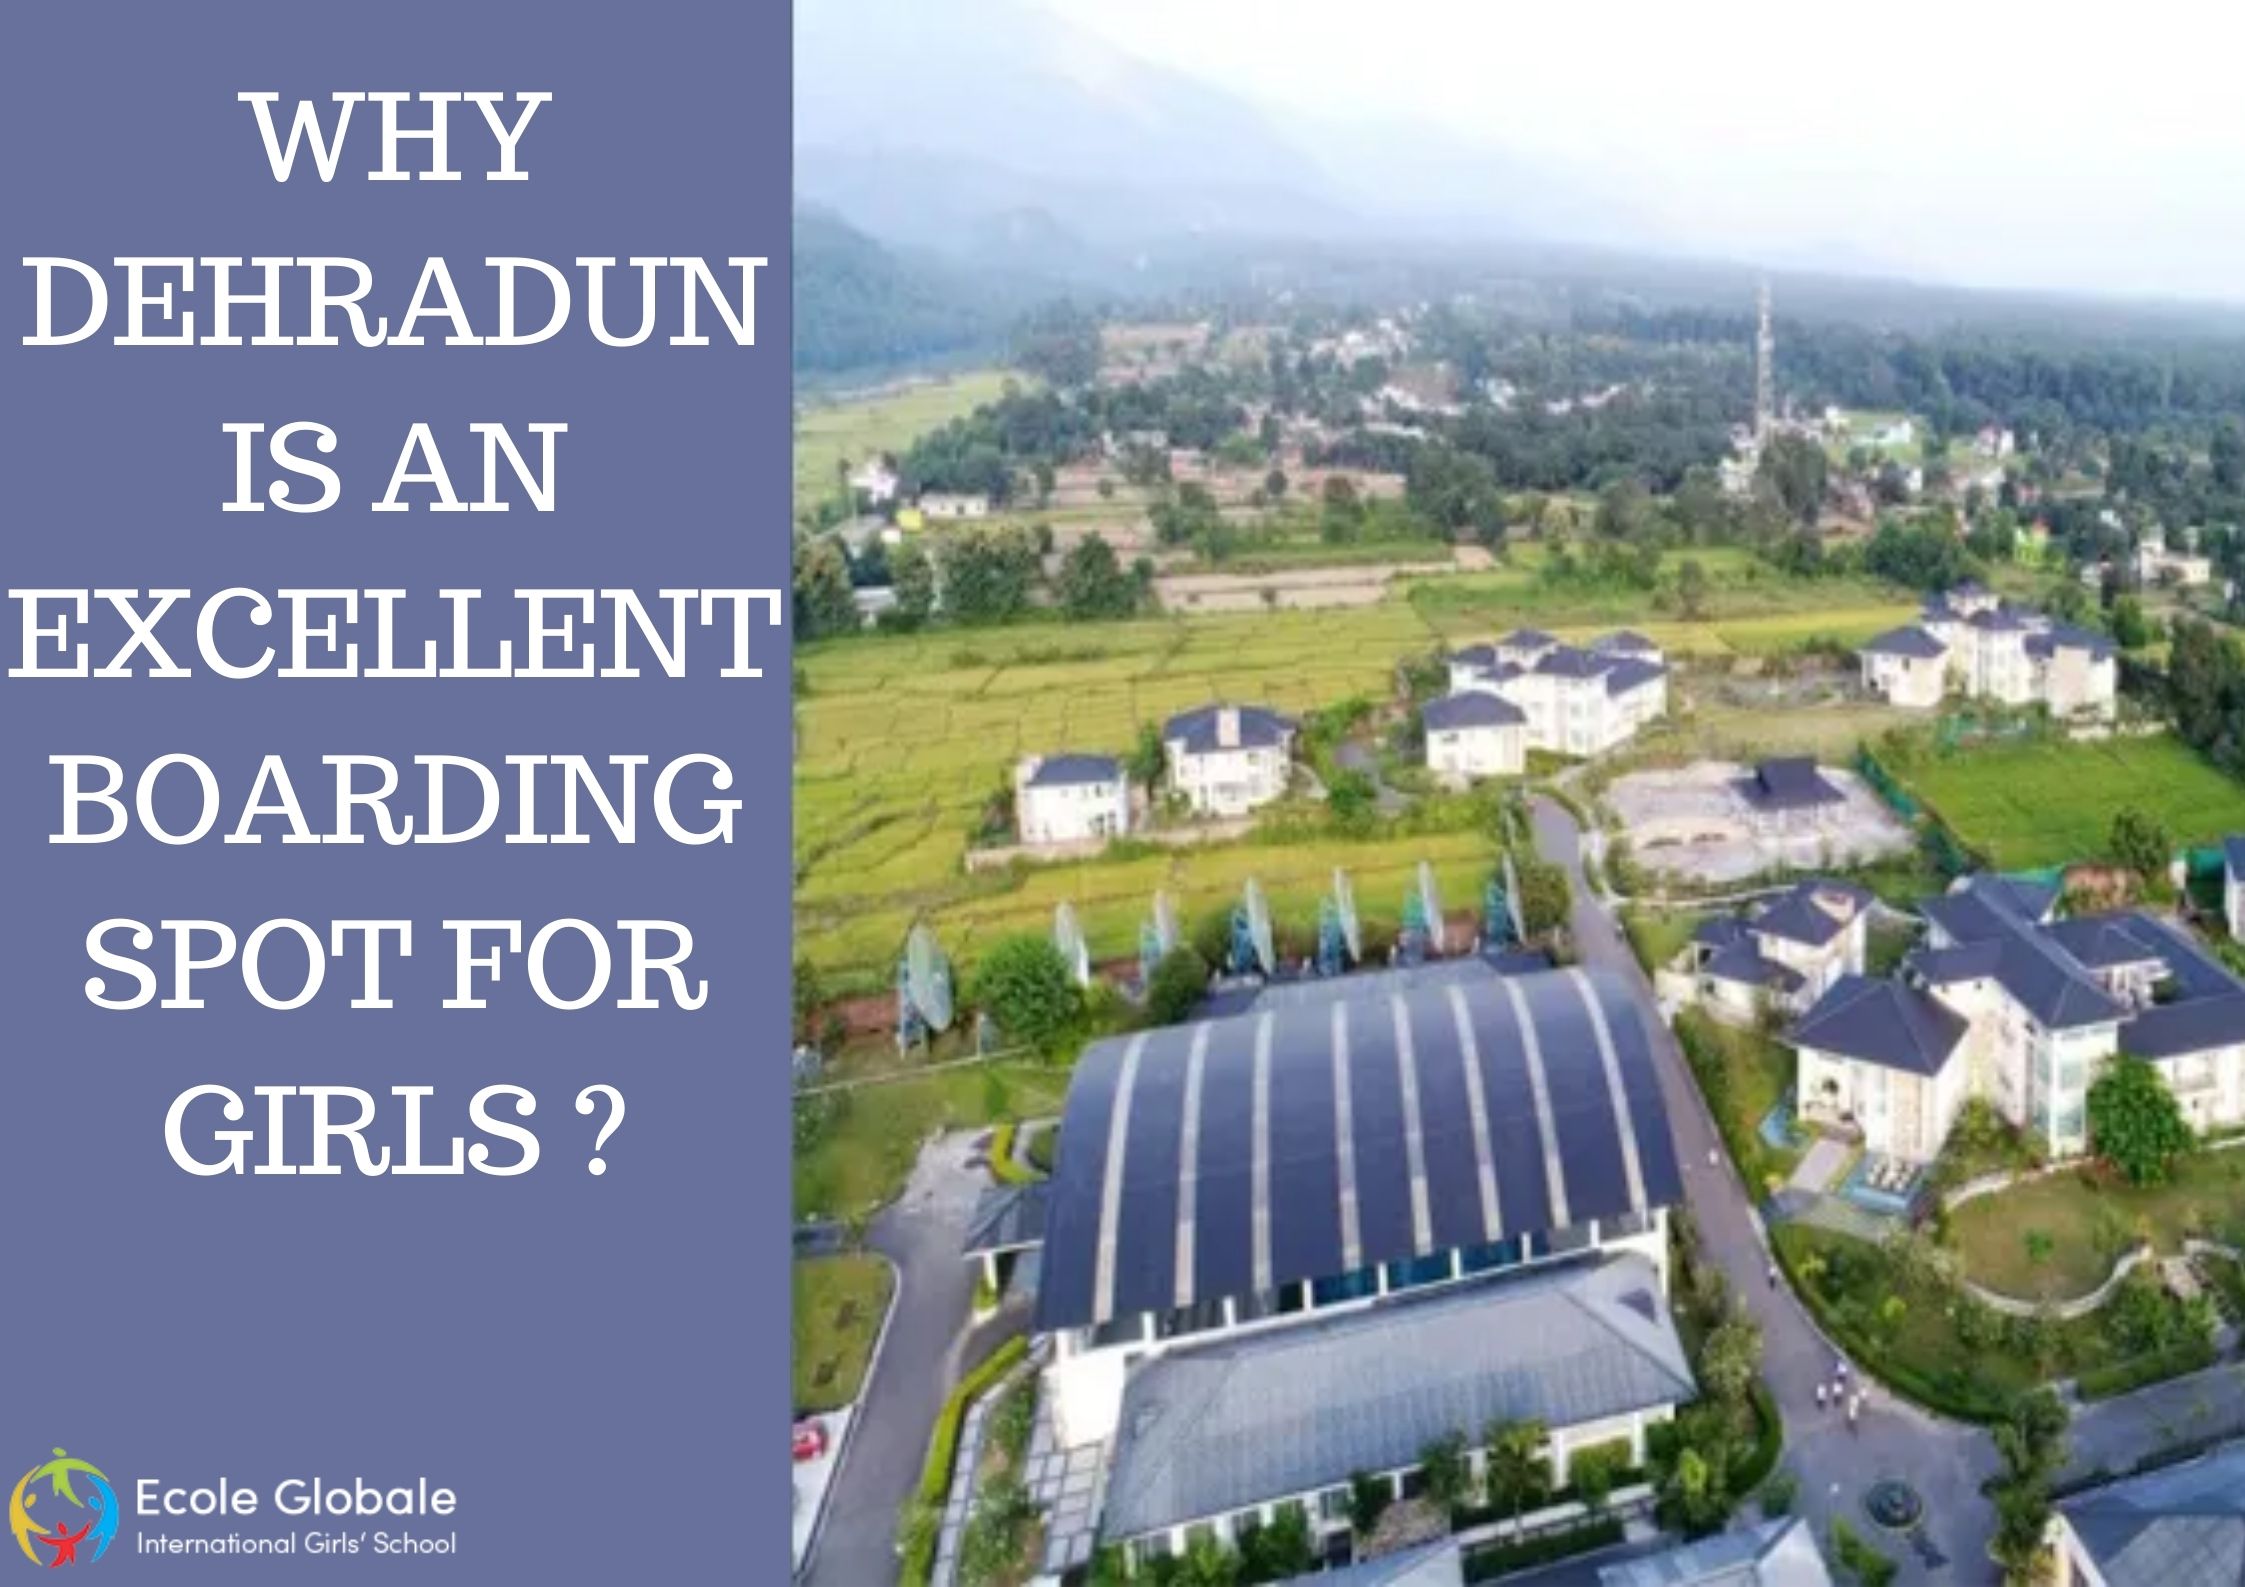 WHAT MAKES DEHRADUN AN EXCELLENT SPOT FOR GIRLS TO SEEK FOR BOARDING SCHOOL?